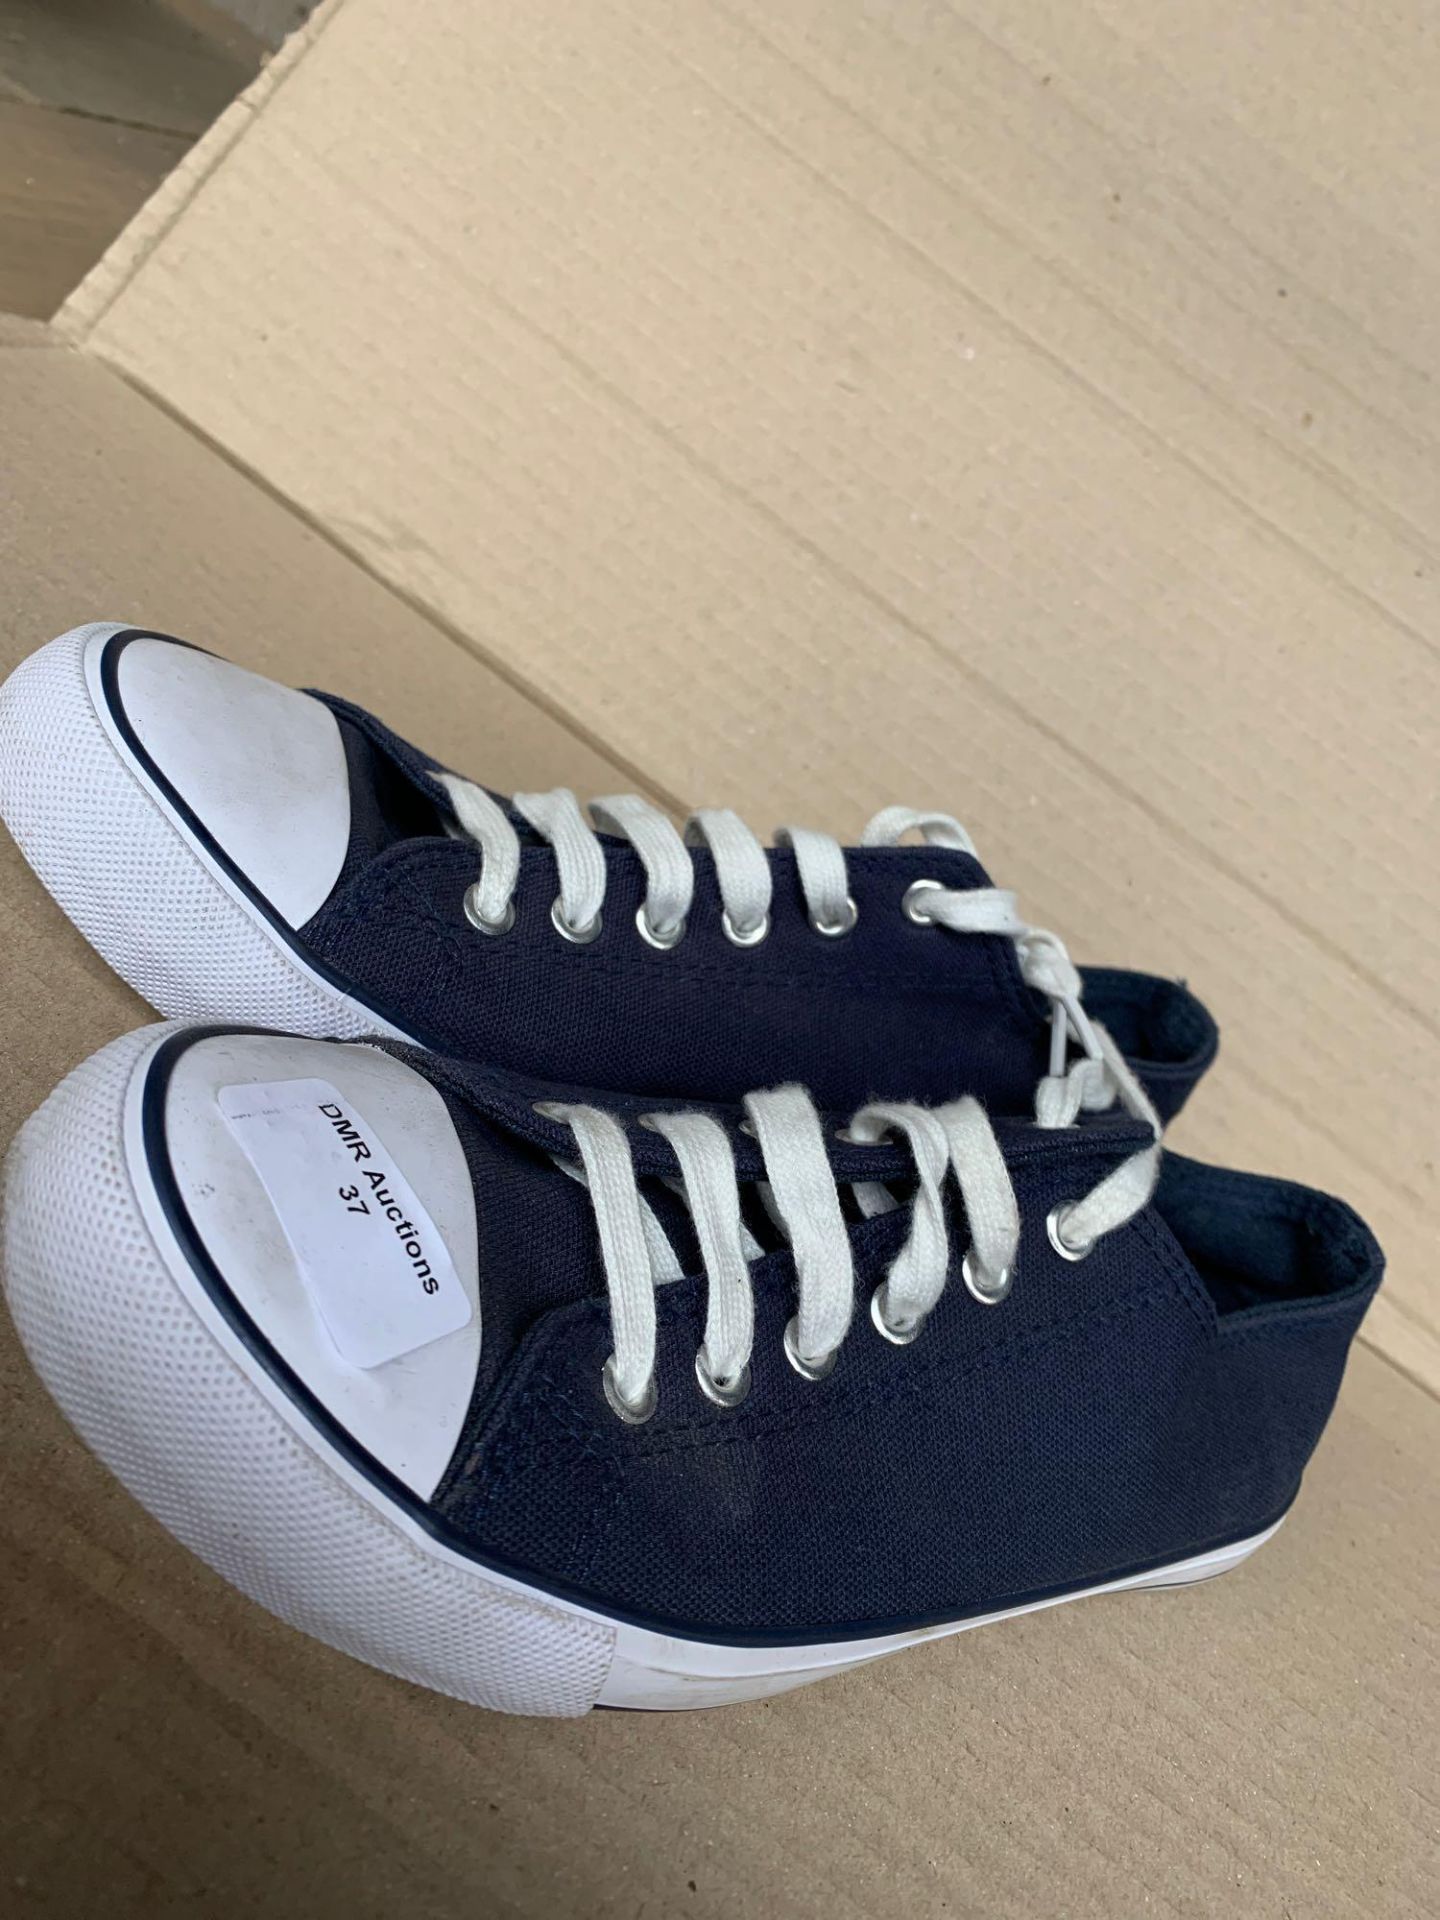 1 PAIR OF LA REDOUTE TRAINERS / SIZE 38